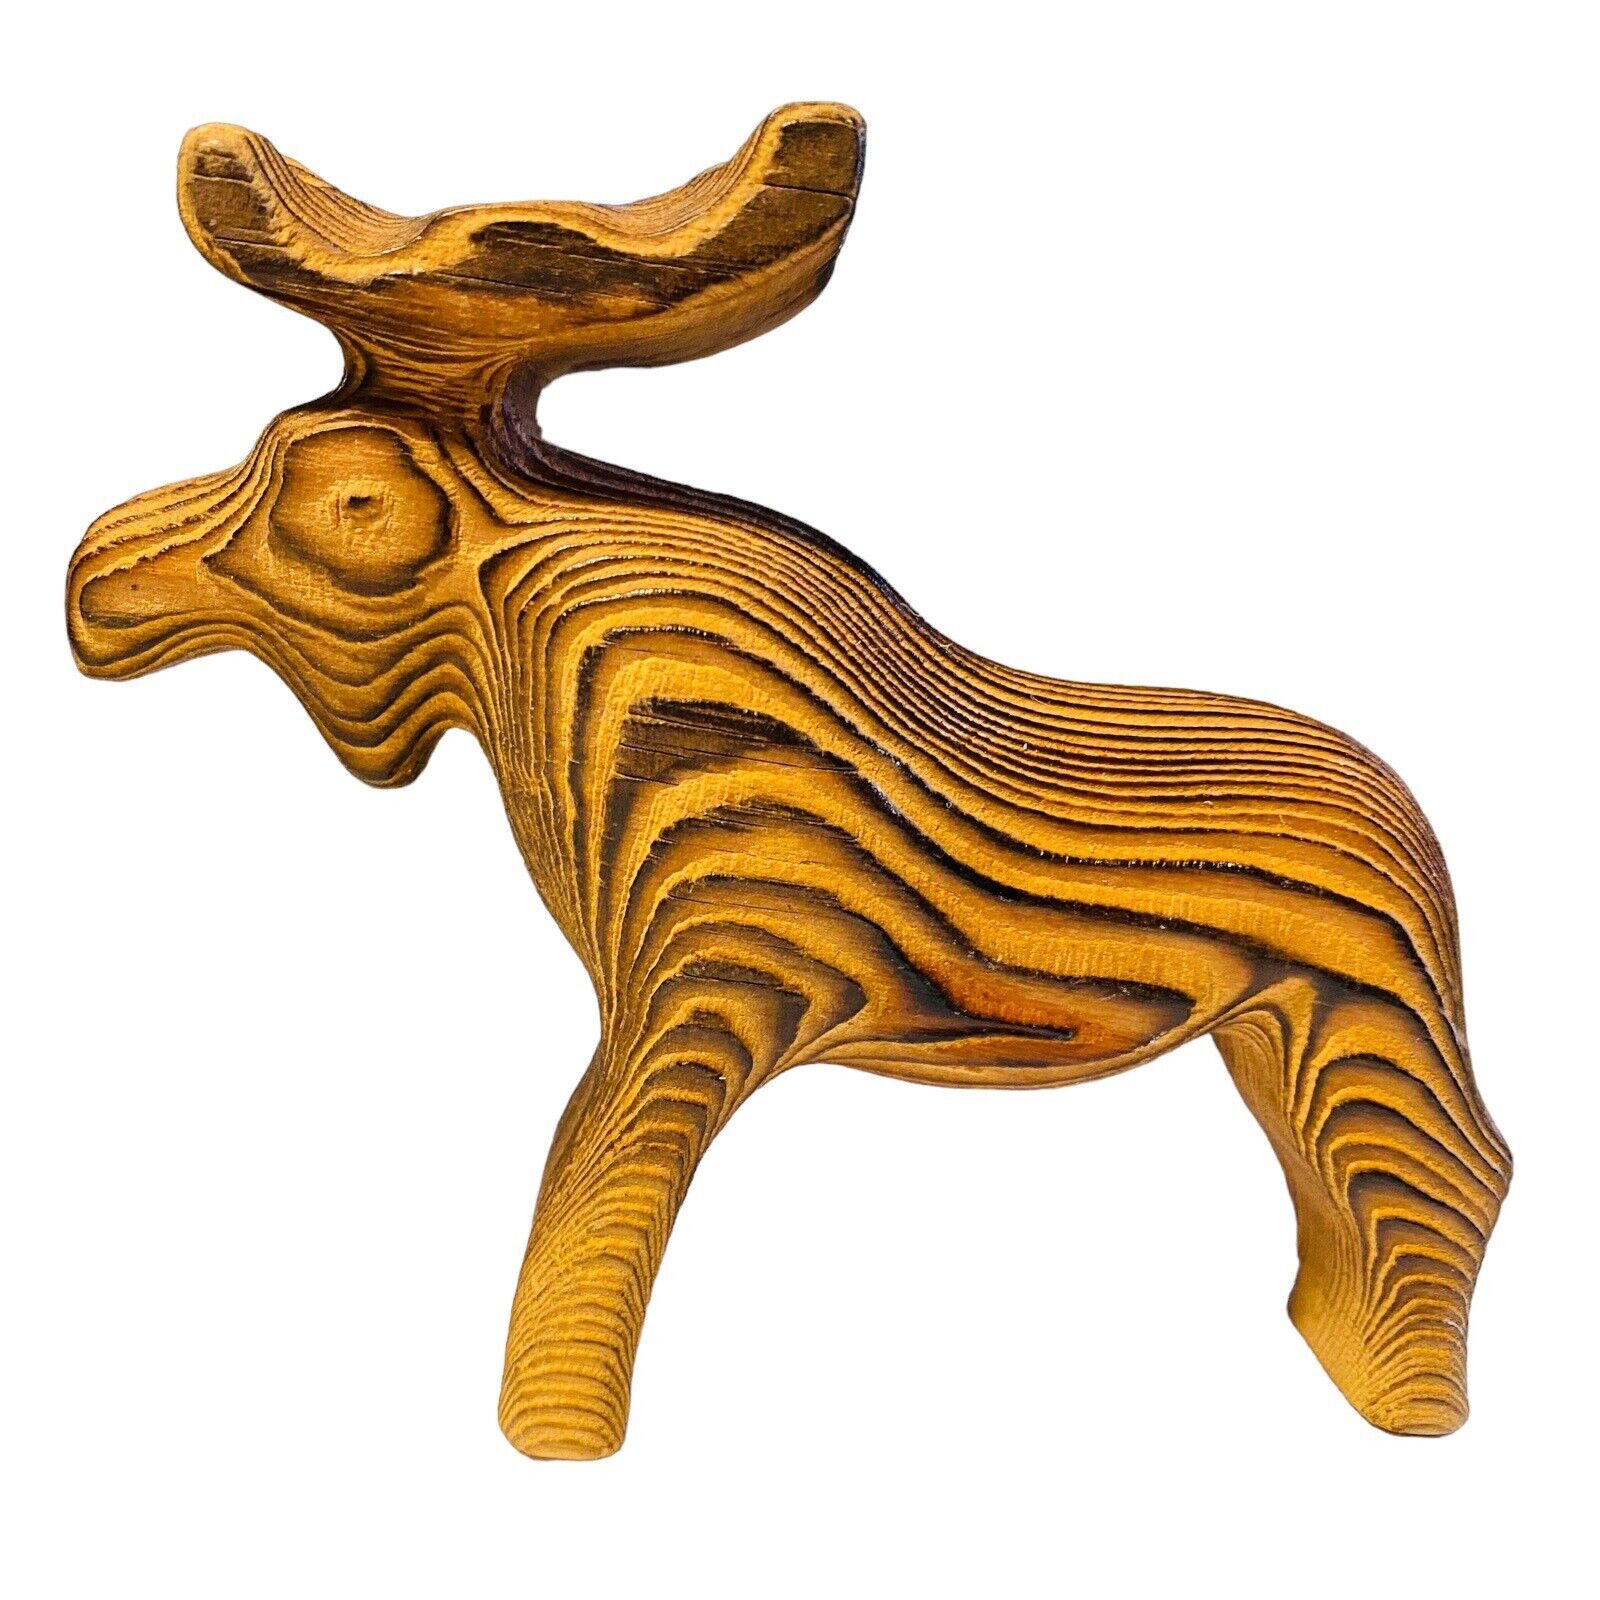 Wooden Hand Carved Flame Burned Moose Statue Figure Caribou Wood Canada